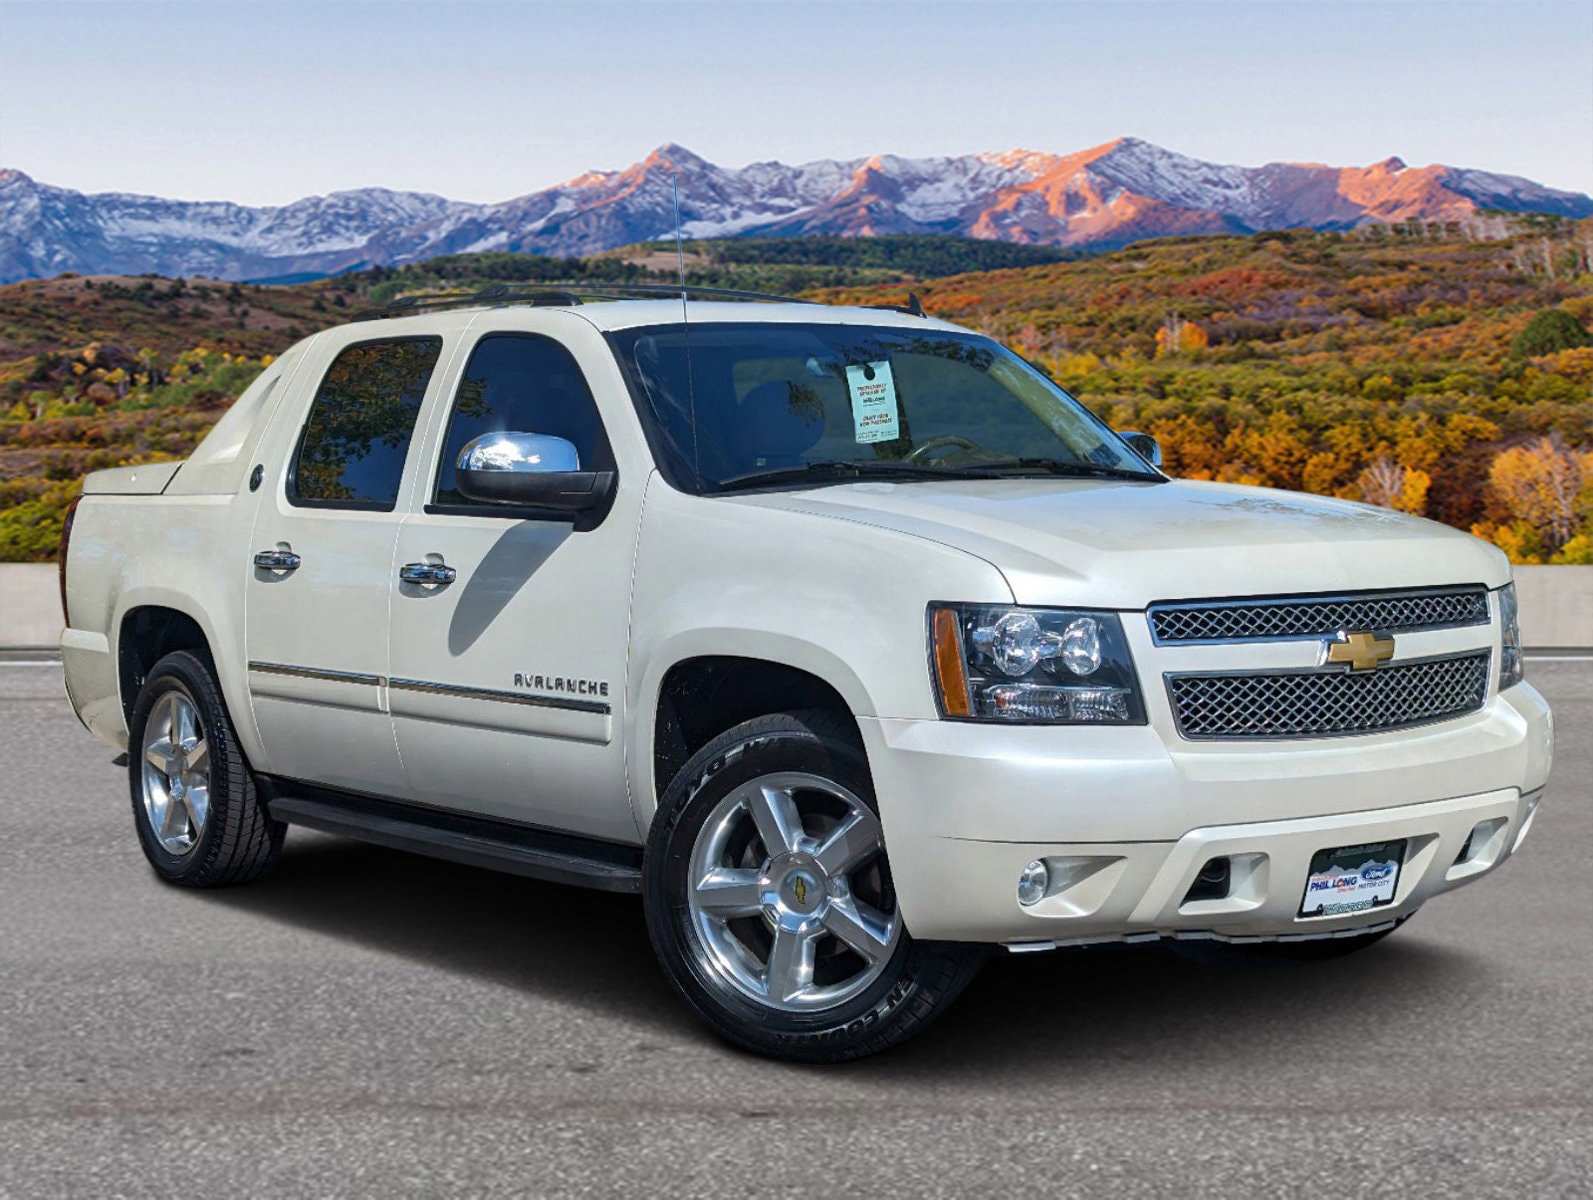 Used 2013 Chevrolet Avalanche Trucks for Sale Near Me